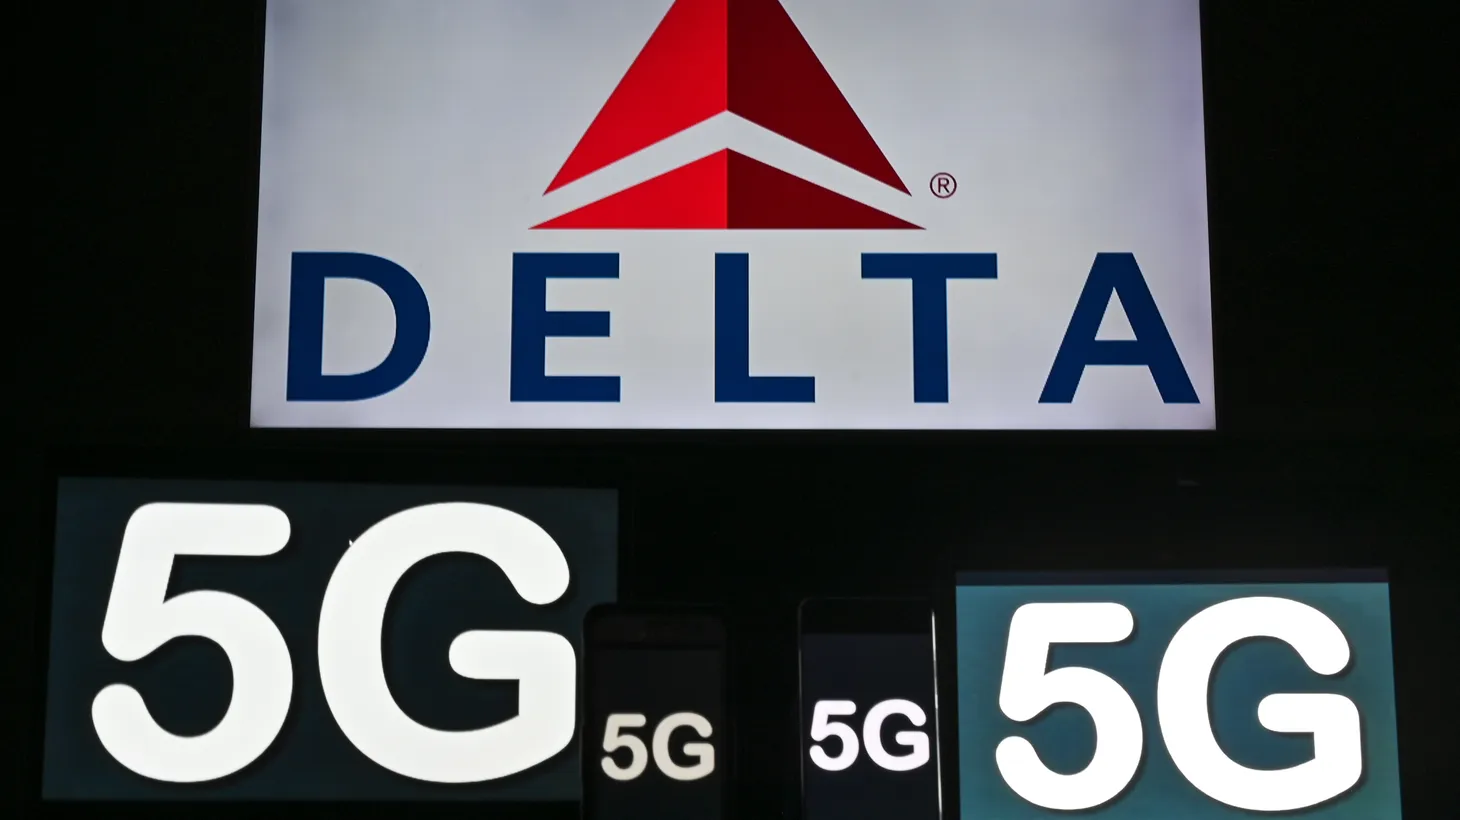 The 5G sign is displayed on screens of mobile phones and computers in front of the Delta Airlines logo.